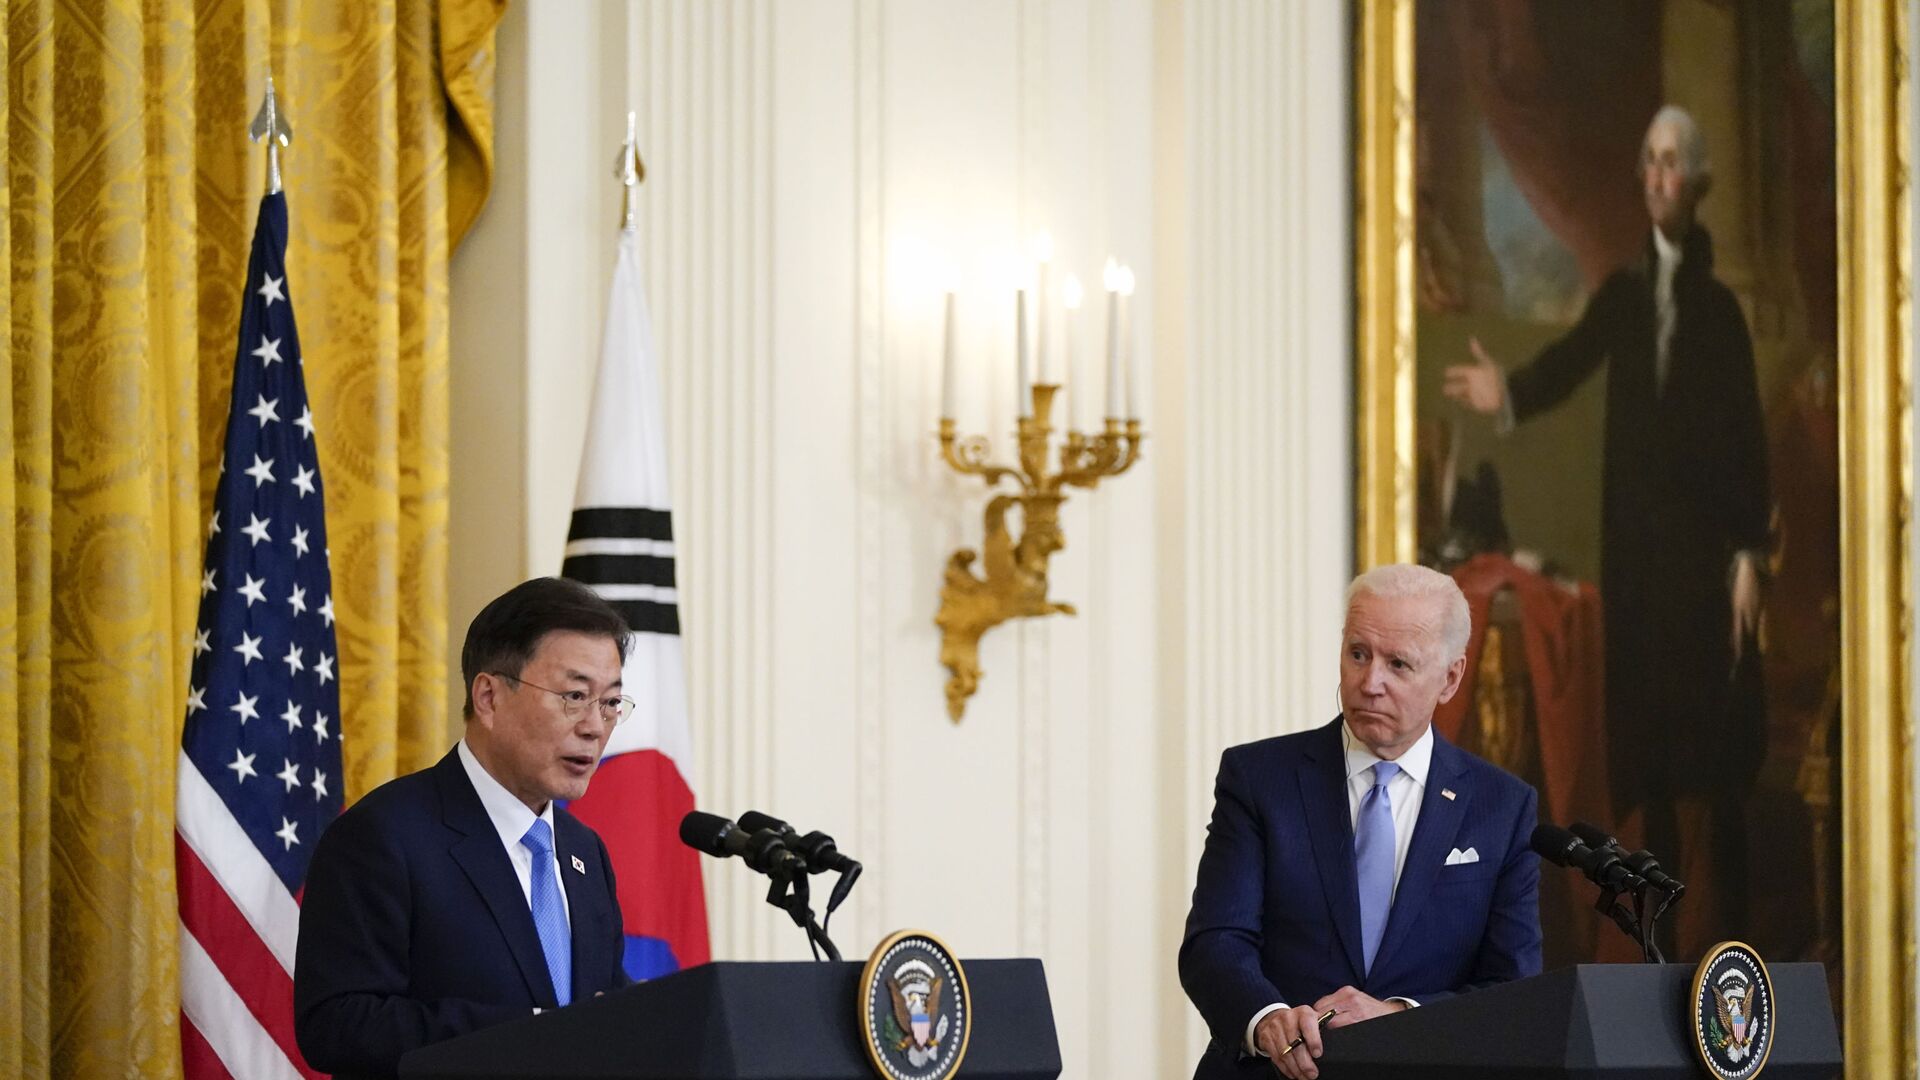 In this May 21, 2021, file photo, President Joe Biden listens as South Korean President Moon Jae-in speaks during a joint news conference in the East Room of the White House, in Washington. - Sputnik International, 1920, 31.05.2021